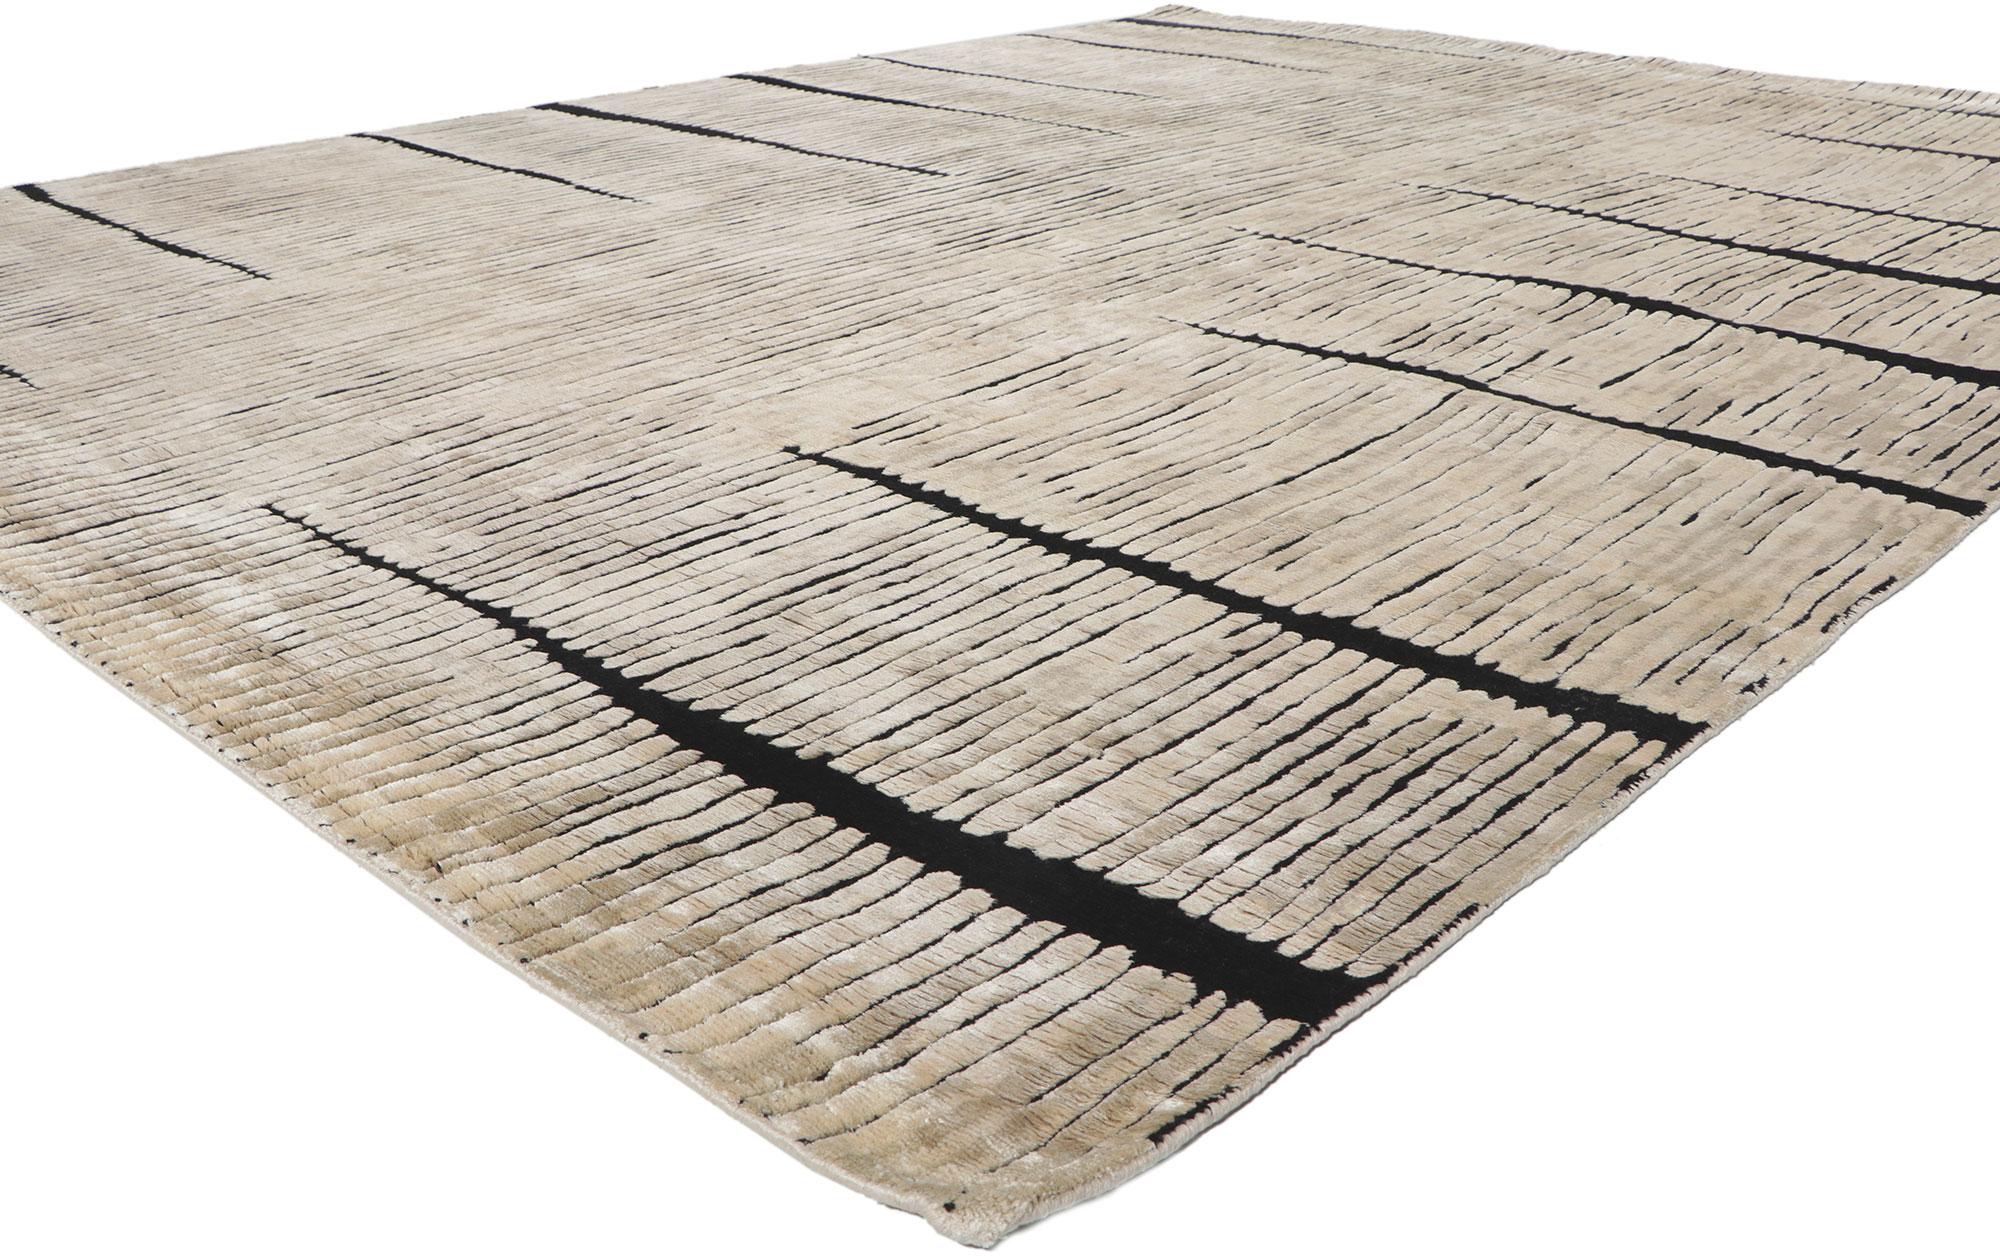 30882 New Contemporary Abstract Texture Rug, 09'01 x 11'11. Showcasing a modern style and raised design with incredible detail and texture, this hand knotted contemporary high-low rug is a captivating vision of woven beauty. The eye-catching